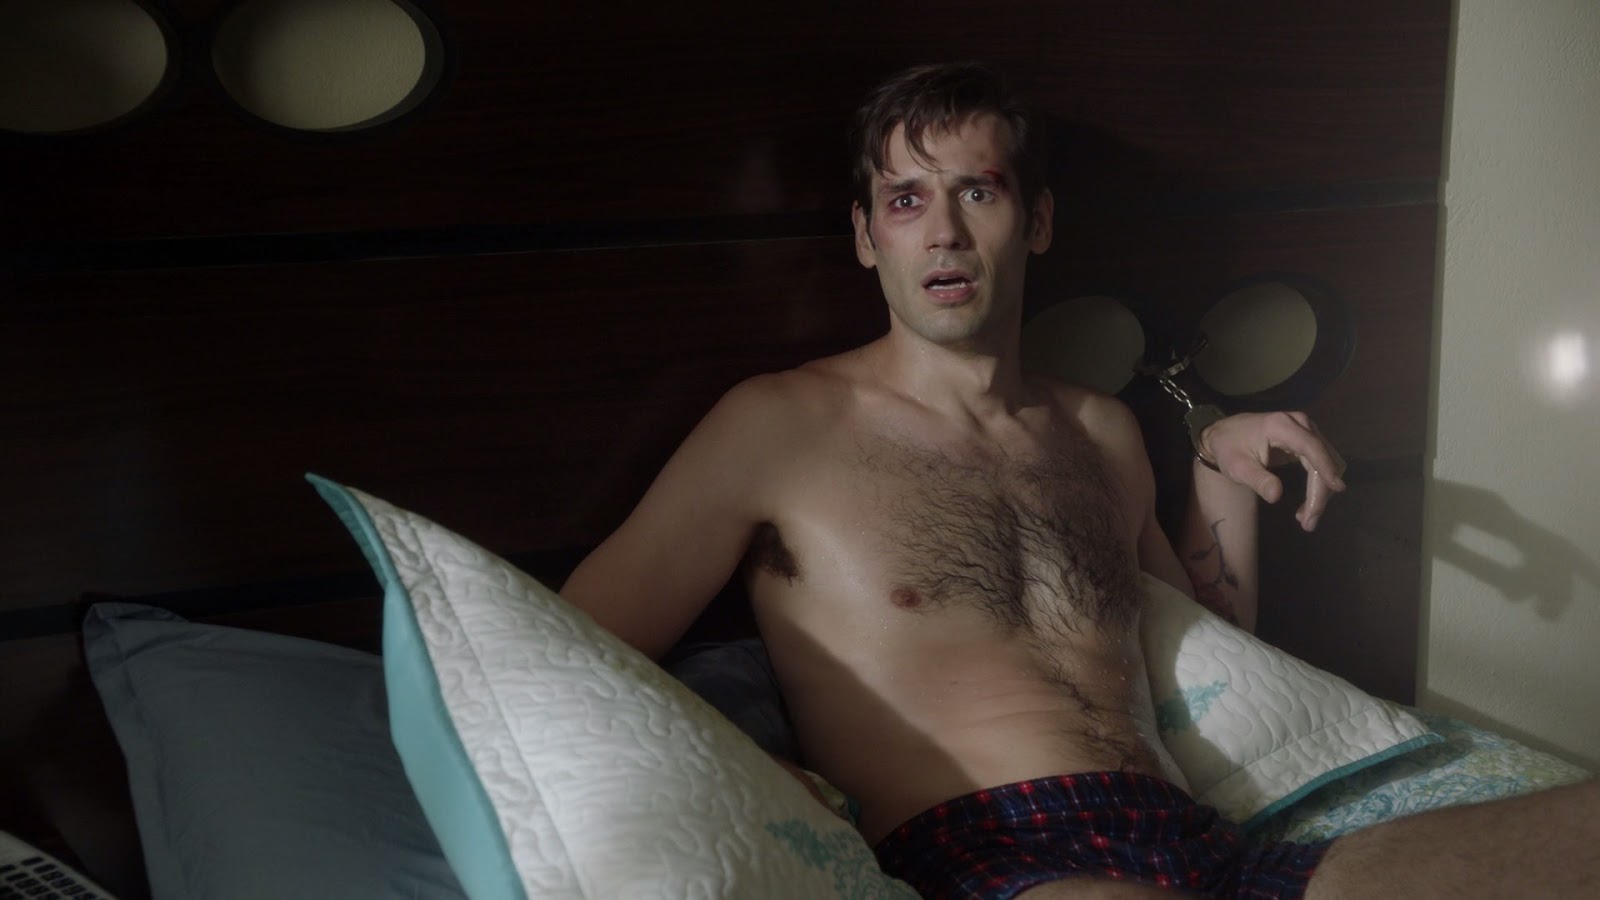 Keywords: handcuffed to bed, shirtless. 